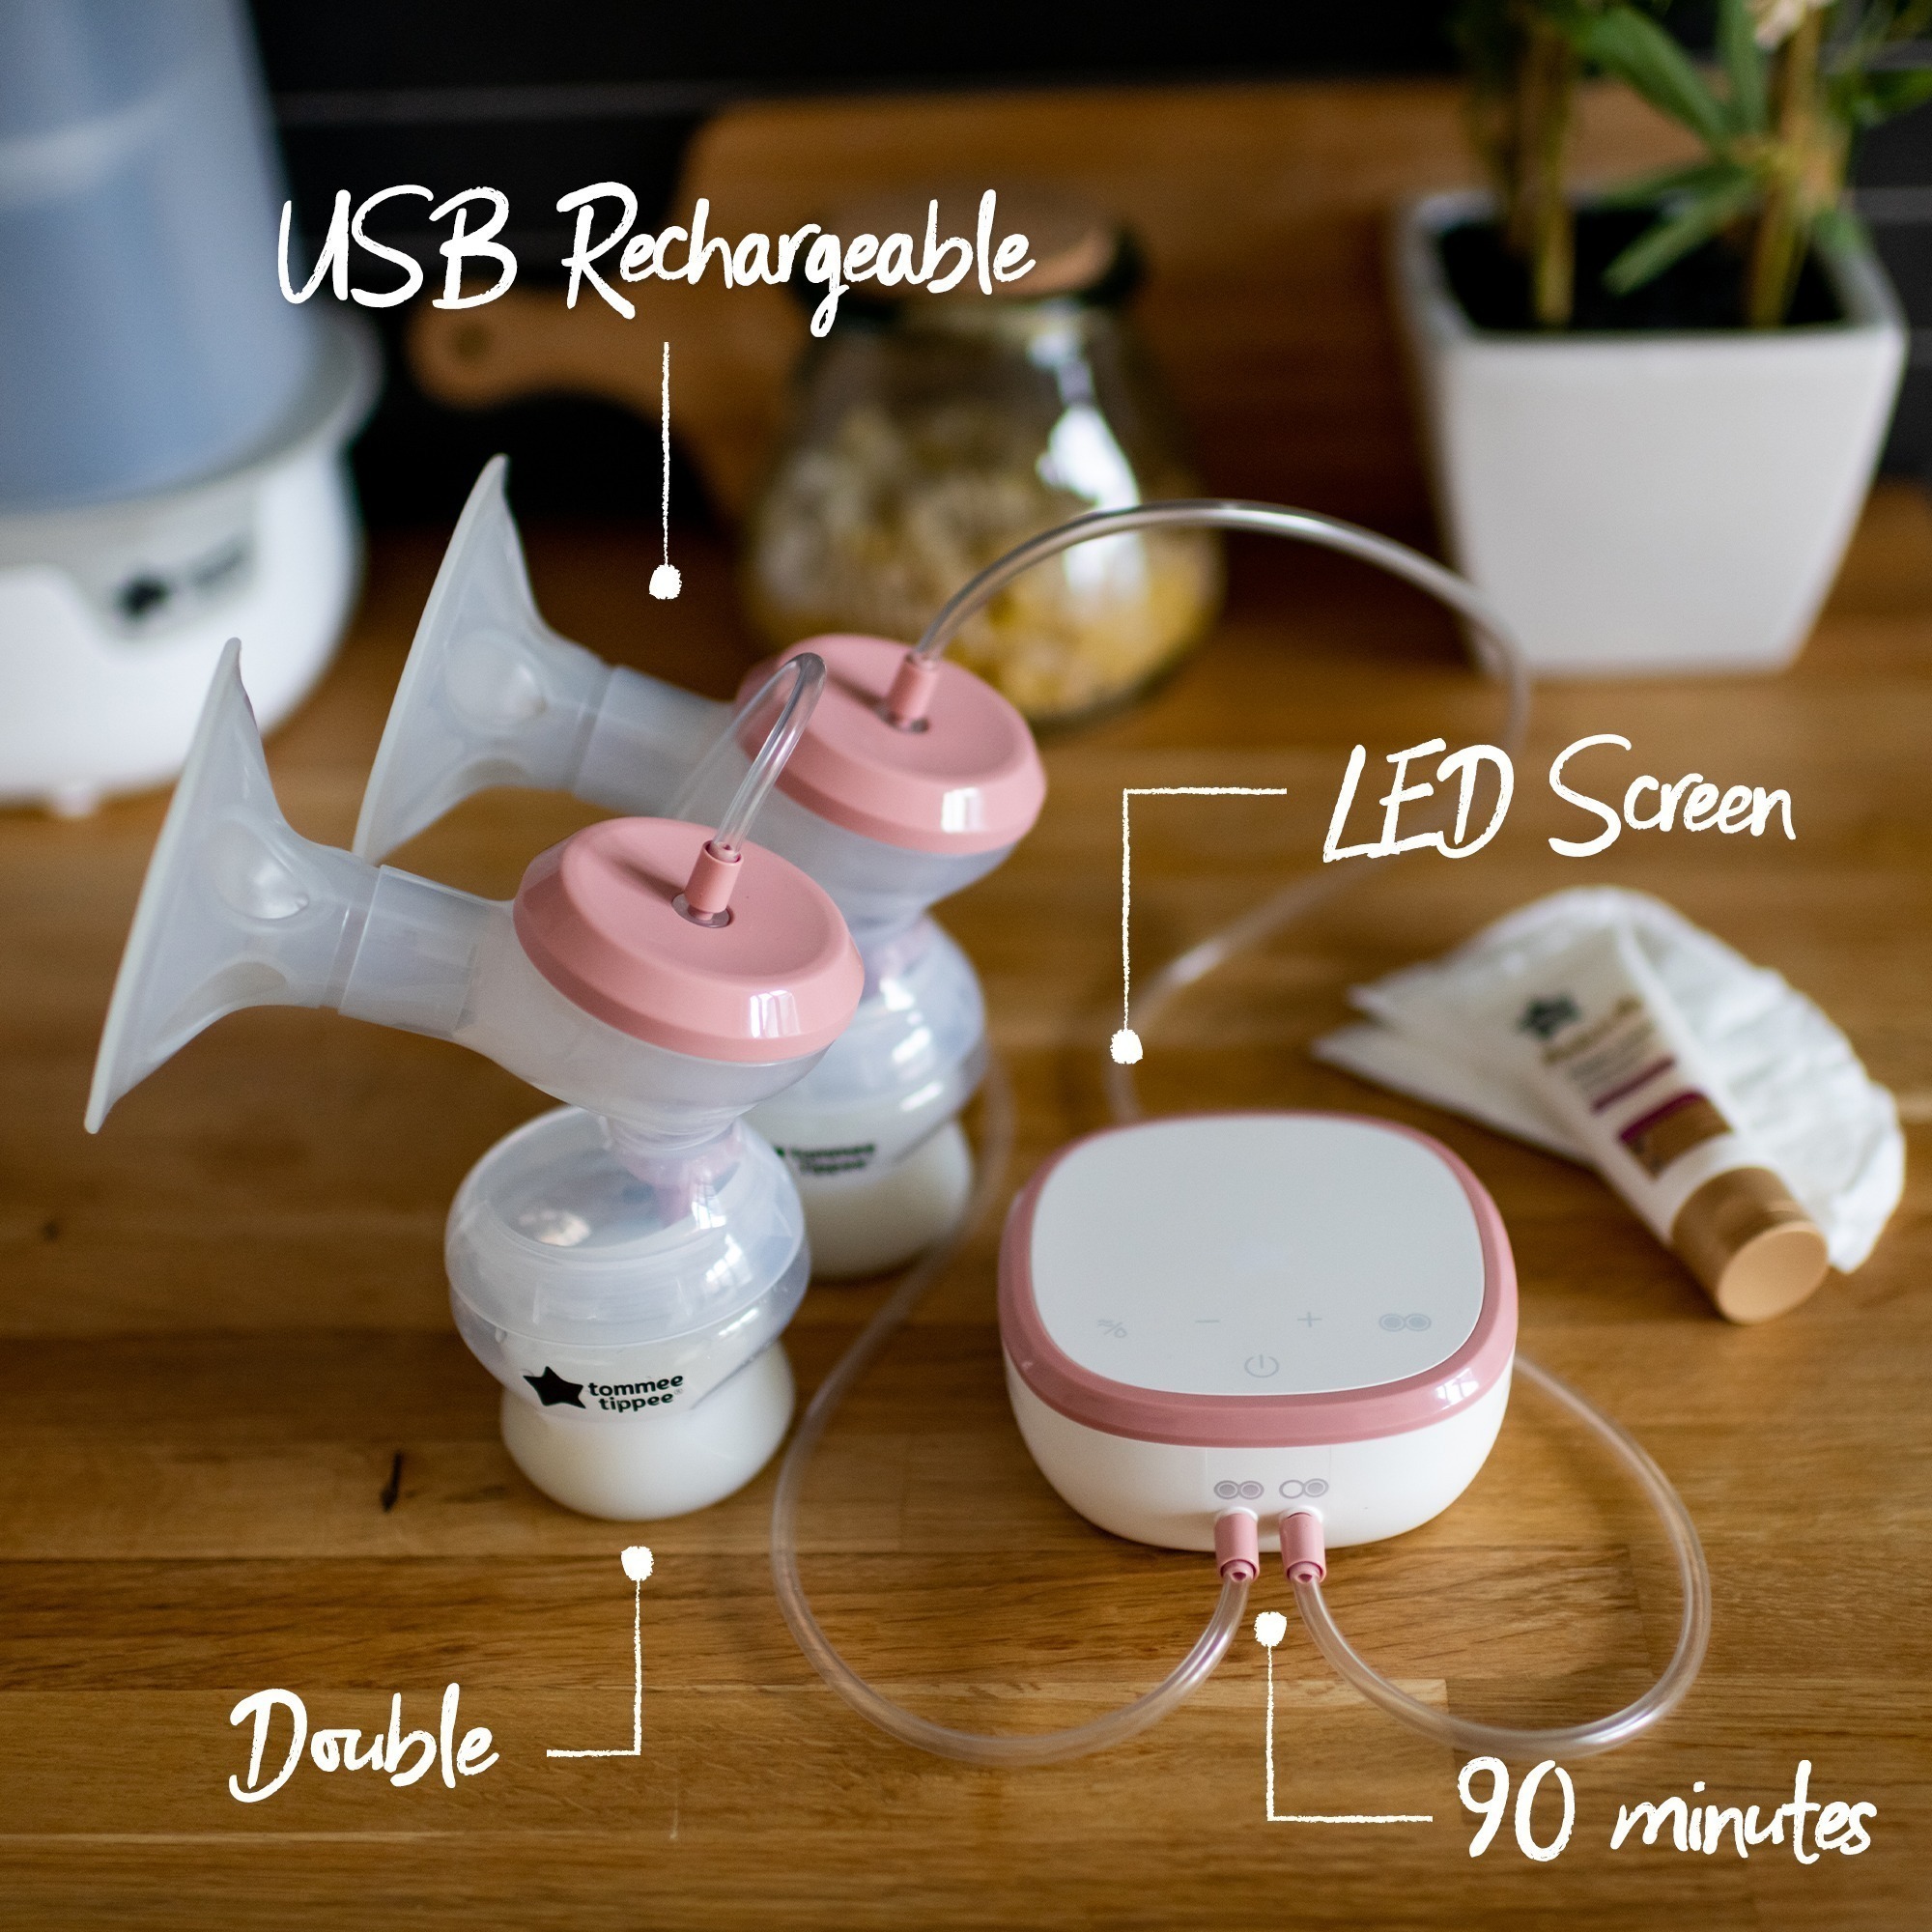 Tommee Tippee Made for Me Double Electric Breast Pump review - Breast pumps  - Feeding Products